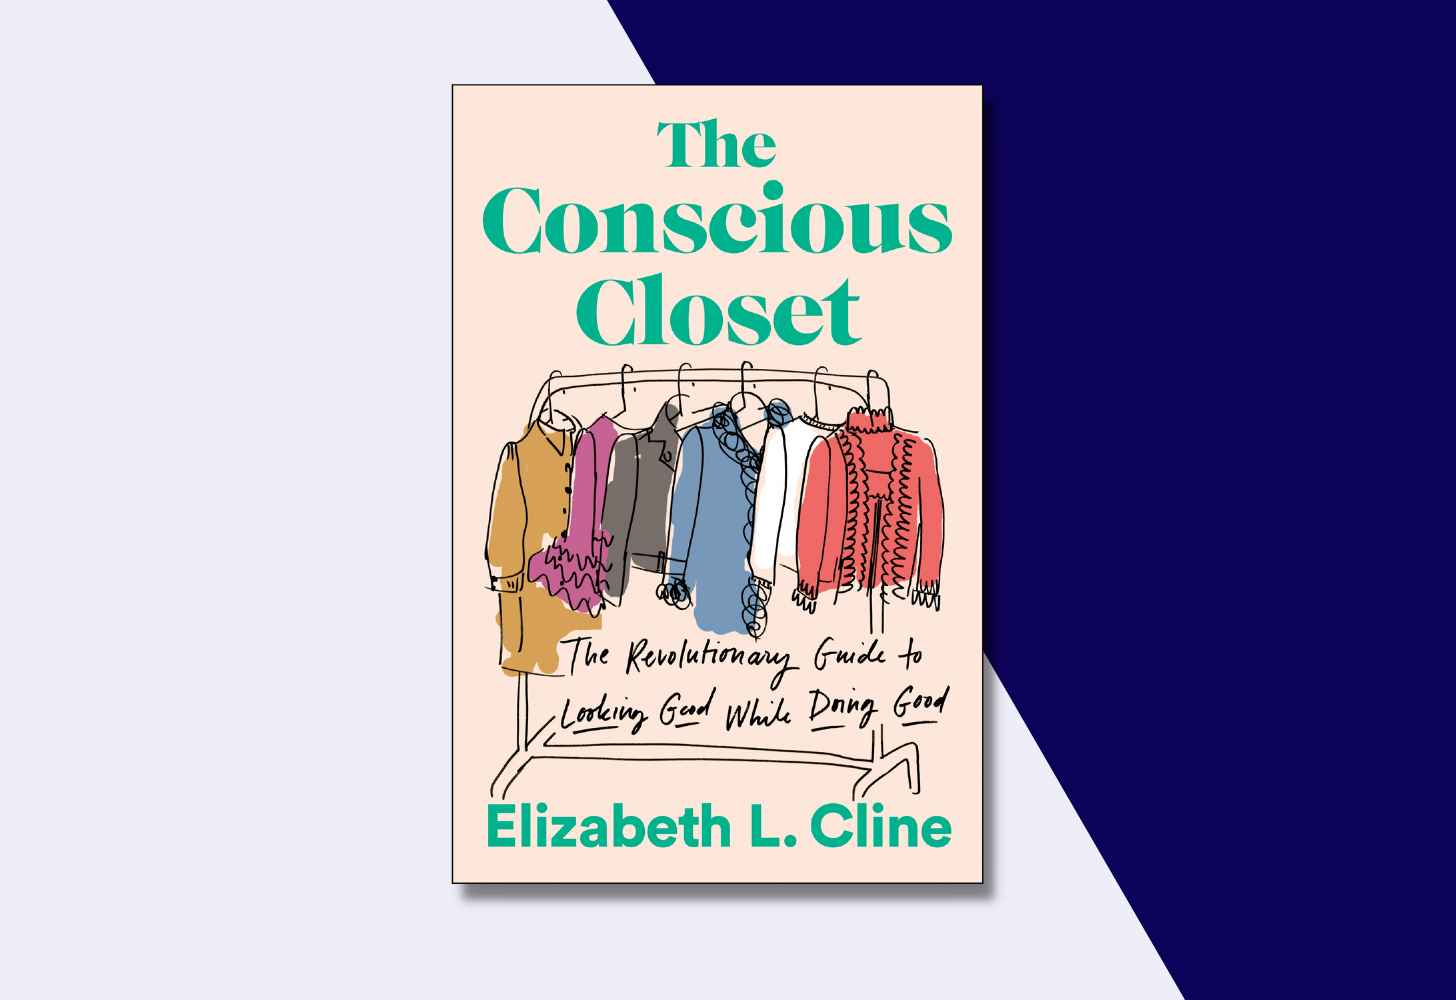 The Cover Of “The Conscious Closet” by Elizabeth L. Cline